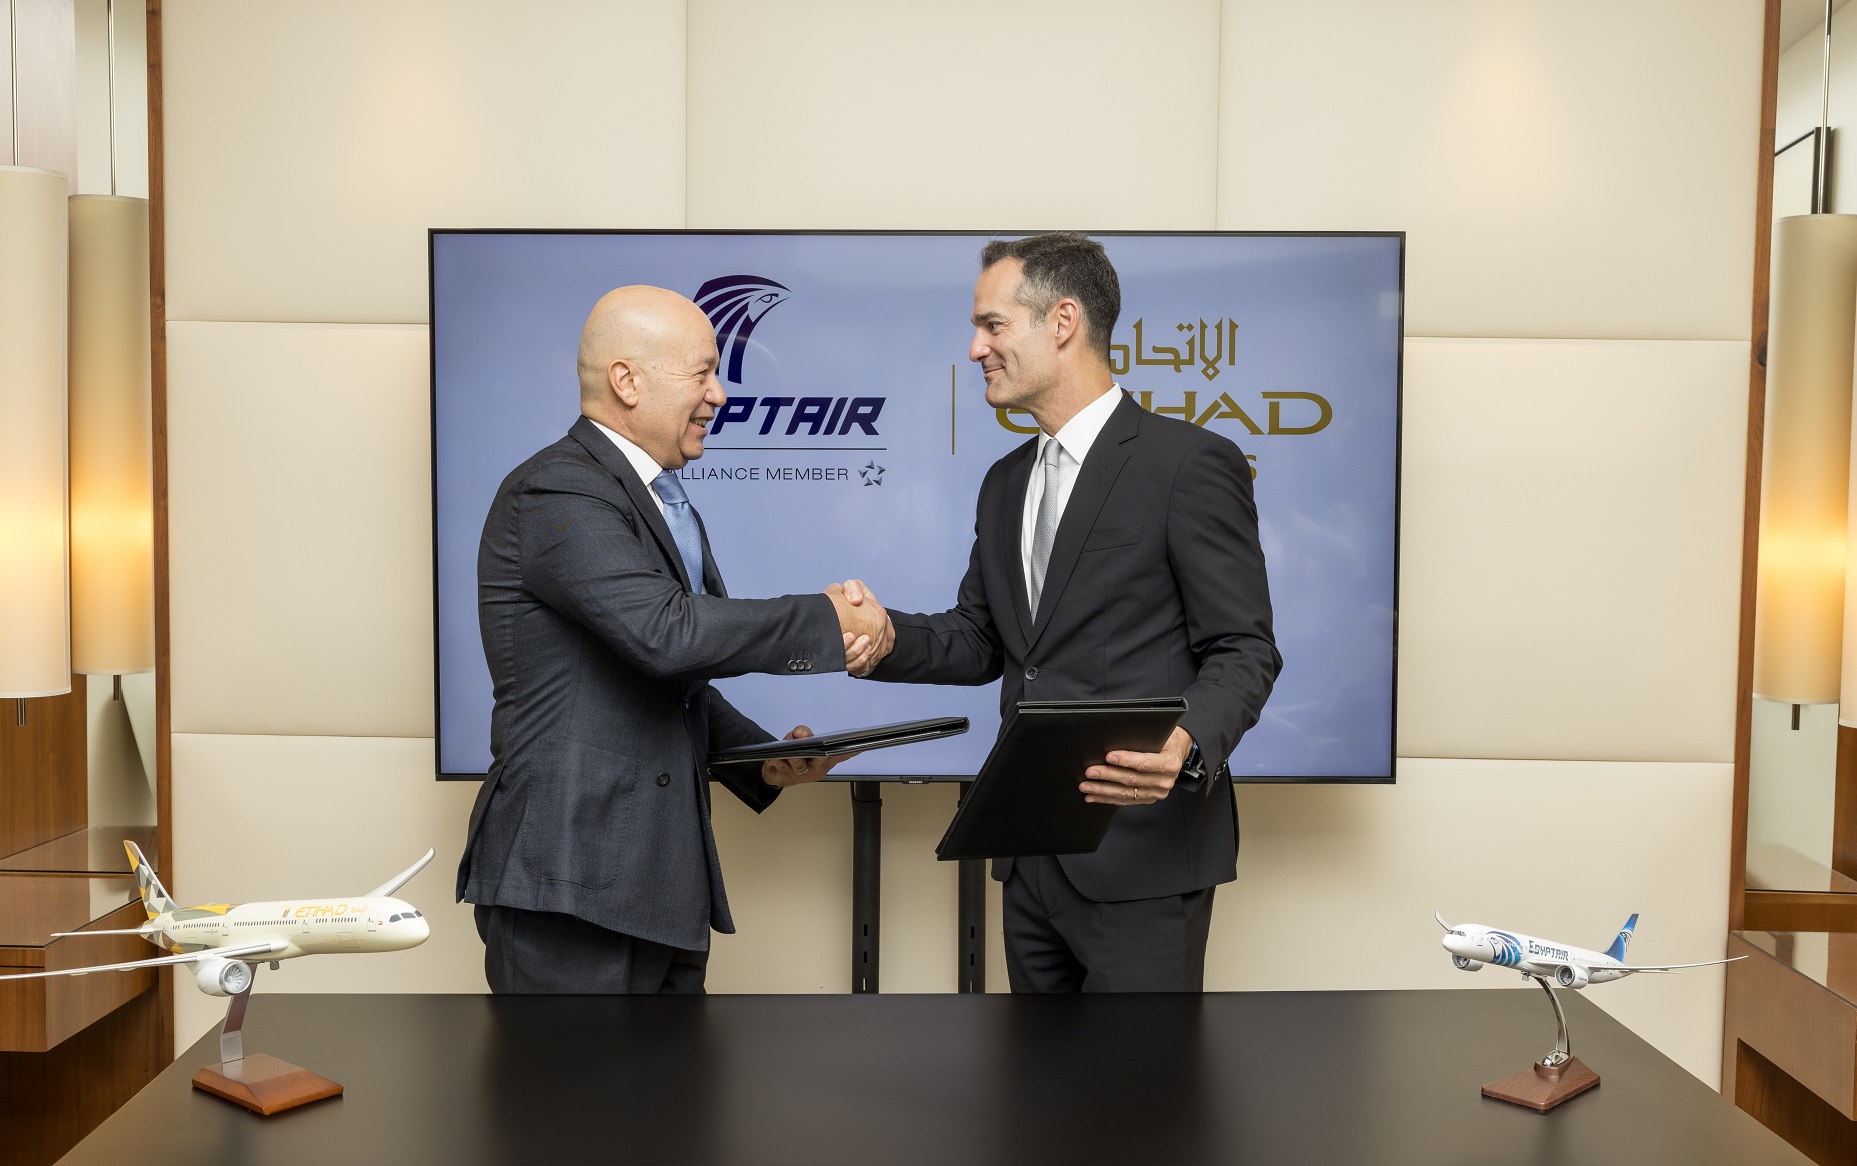 Etihad Airways And Egyptair Sign MoU To Deepen Relationship